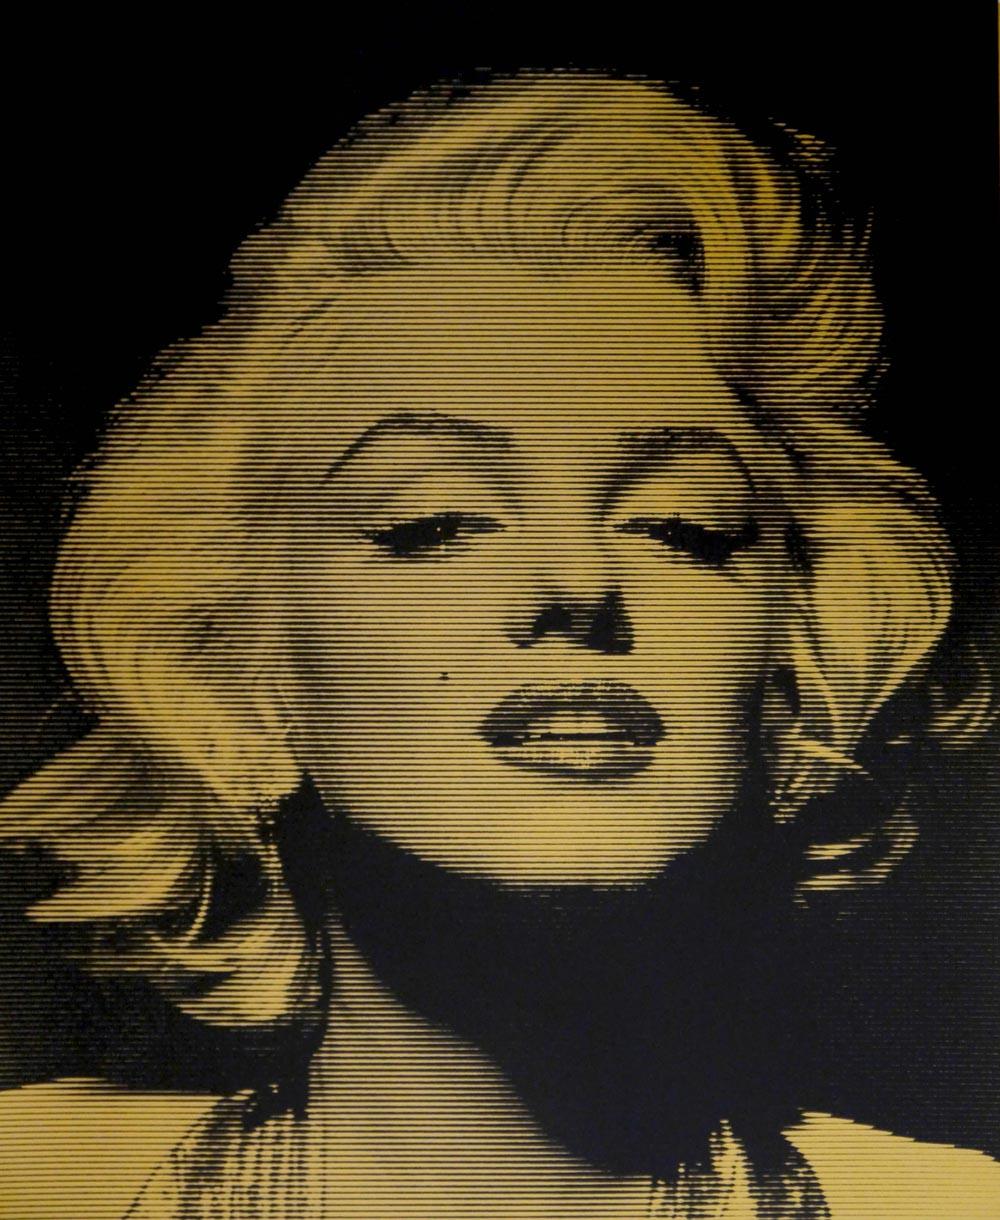 David Studwell Portrait Photograph – Gold Marylin Monroe, limited edition gold Screen print